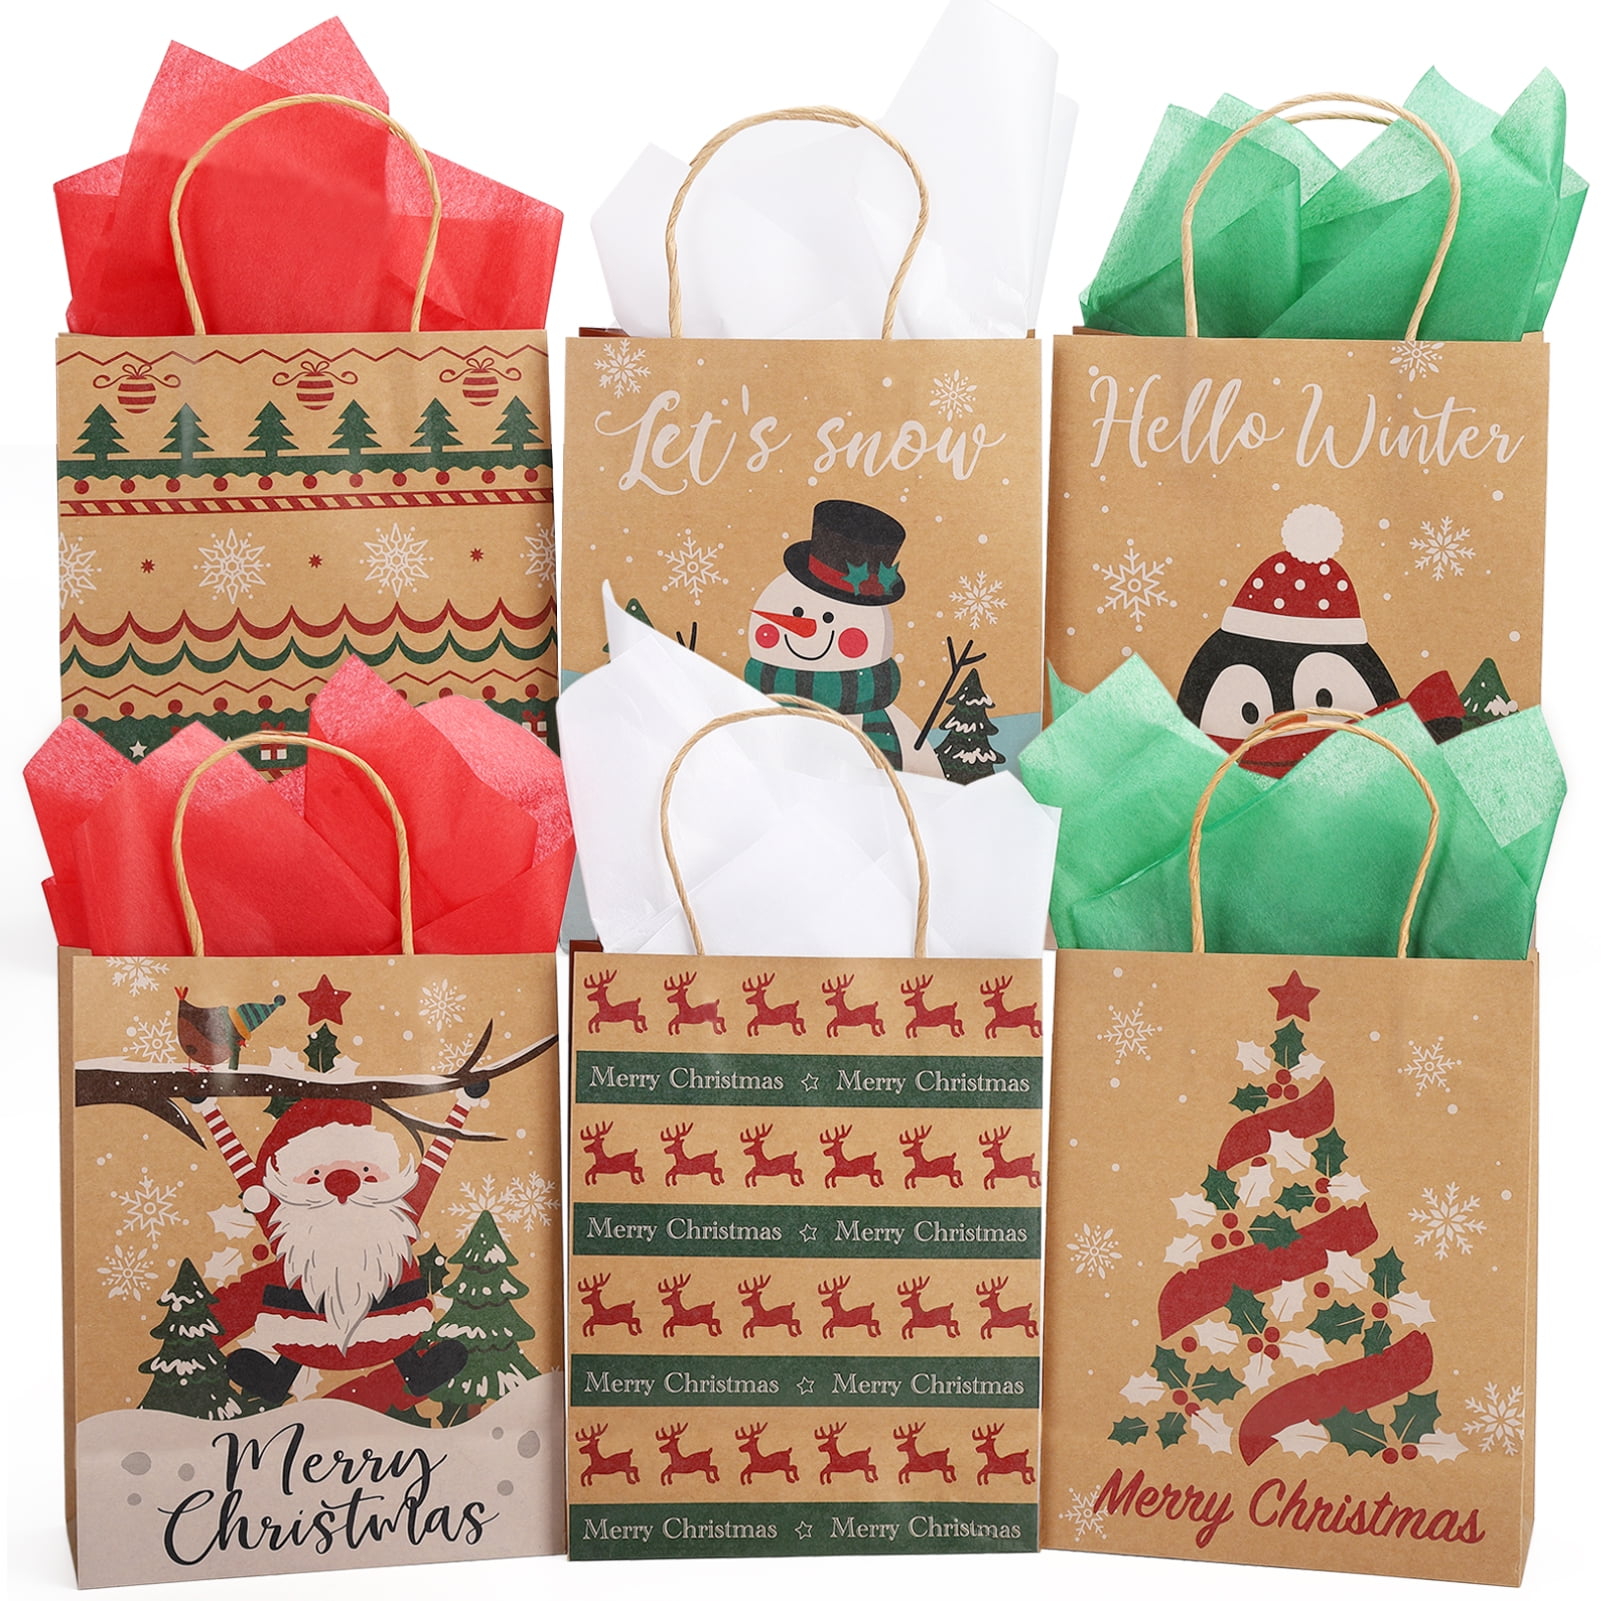 Christmas Tissue Paper for Gift Bags 100 Sheets | Red Green and White  Christmas Sheets-Christmas Wrapping Tissue Paper Bulk 20 X 20 Tissue Sheets